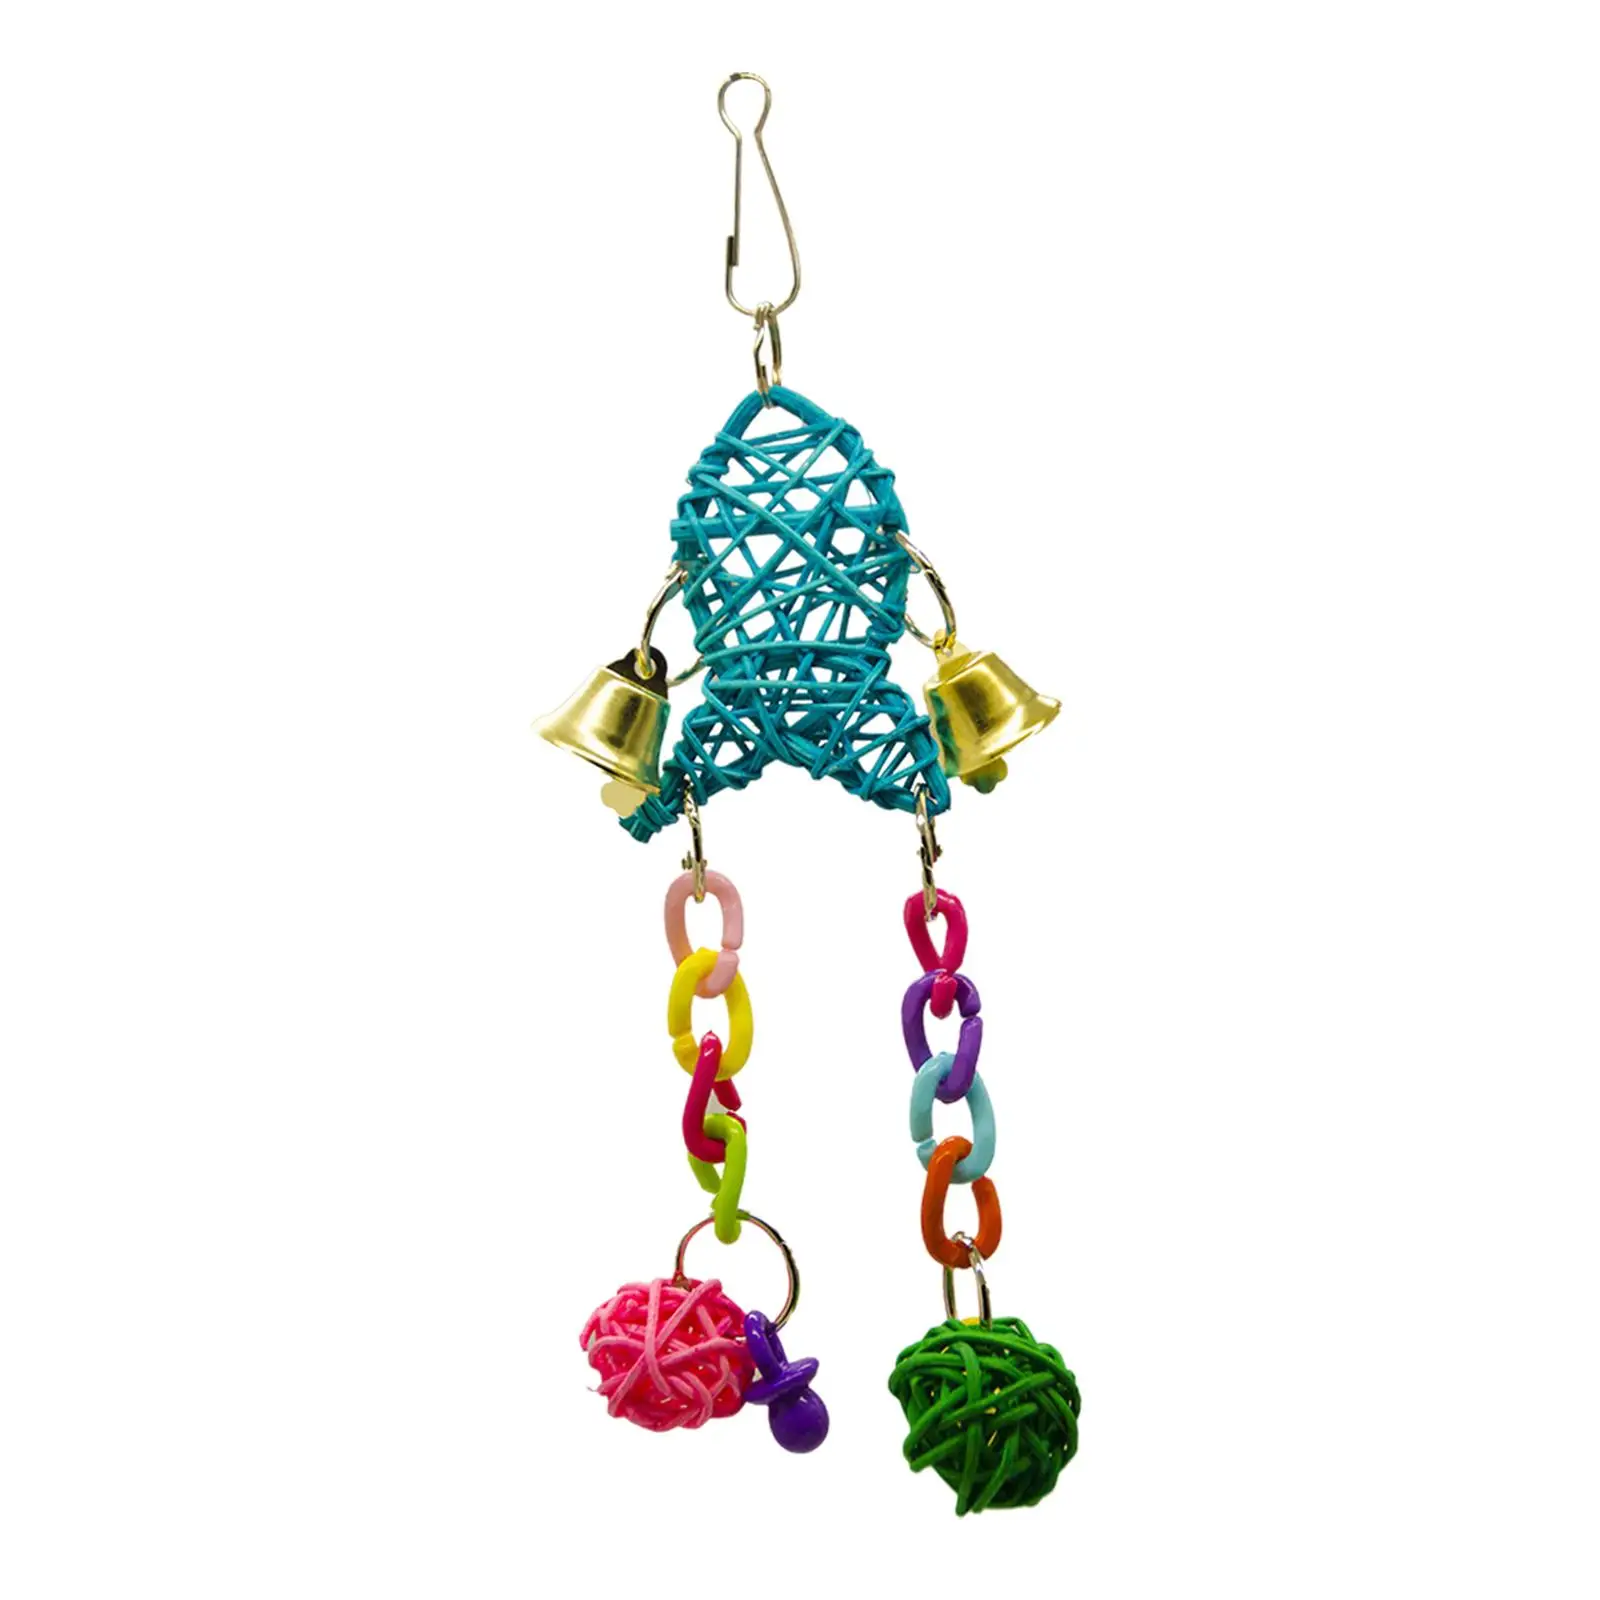  Cage Birds Chewing Bite Boredom Breaker Perches Nest Swing Activity Bells Bird Toy for Cockatiels Budgie Finches